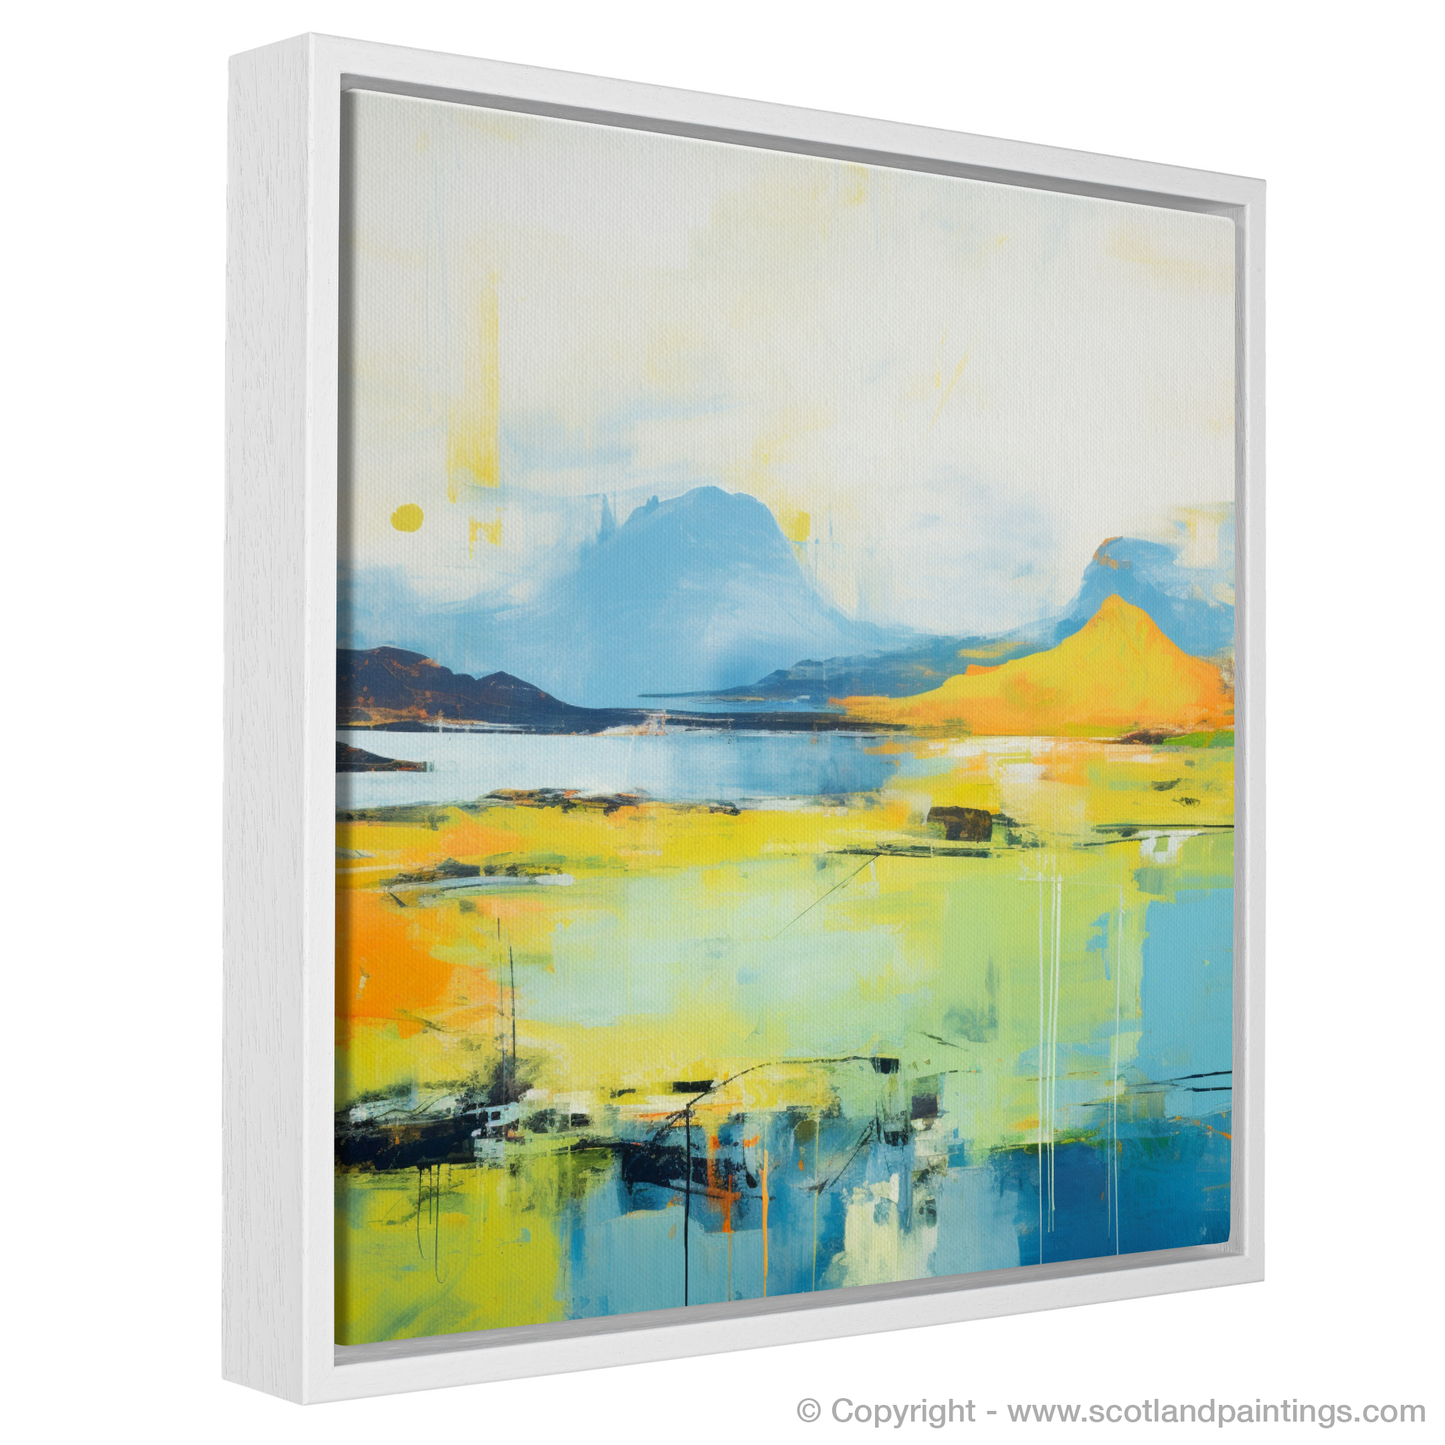 Painting and Art Print of Isle of Raasay, Inner Hebrides in summer entitled "Summer Essence of Raasay - An Abstract Interpretation".